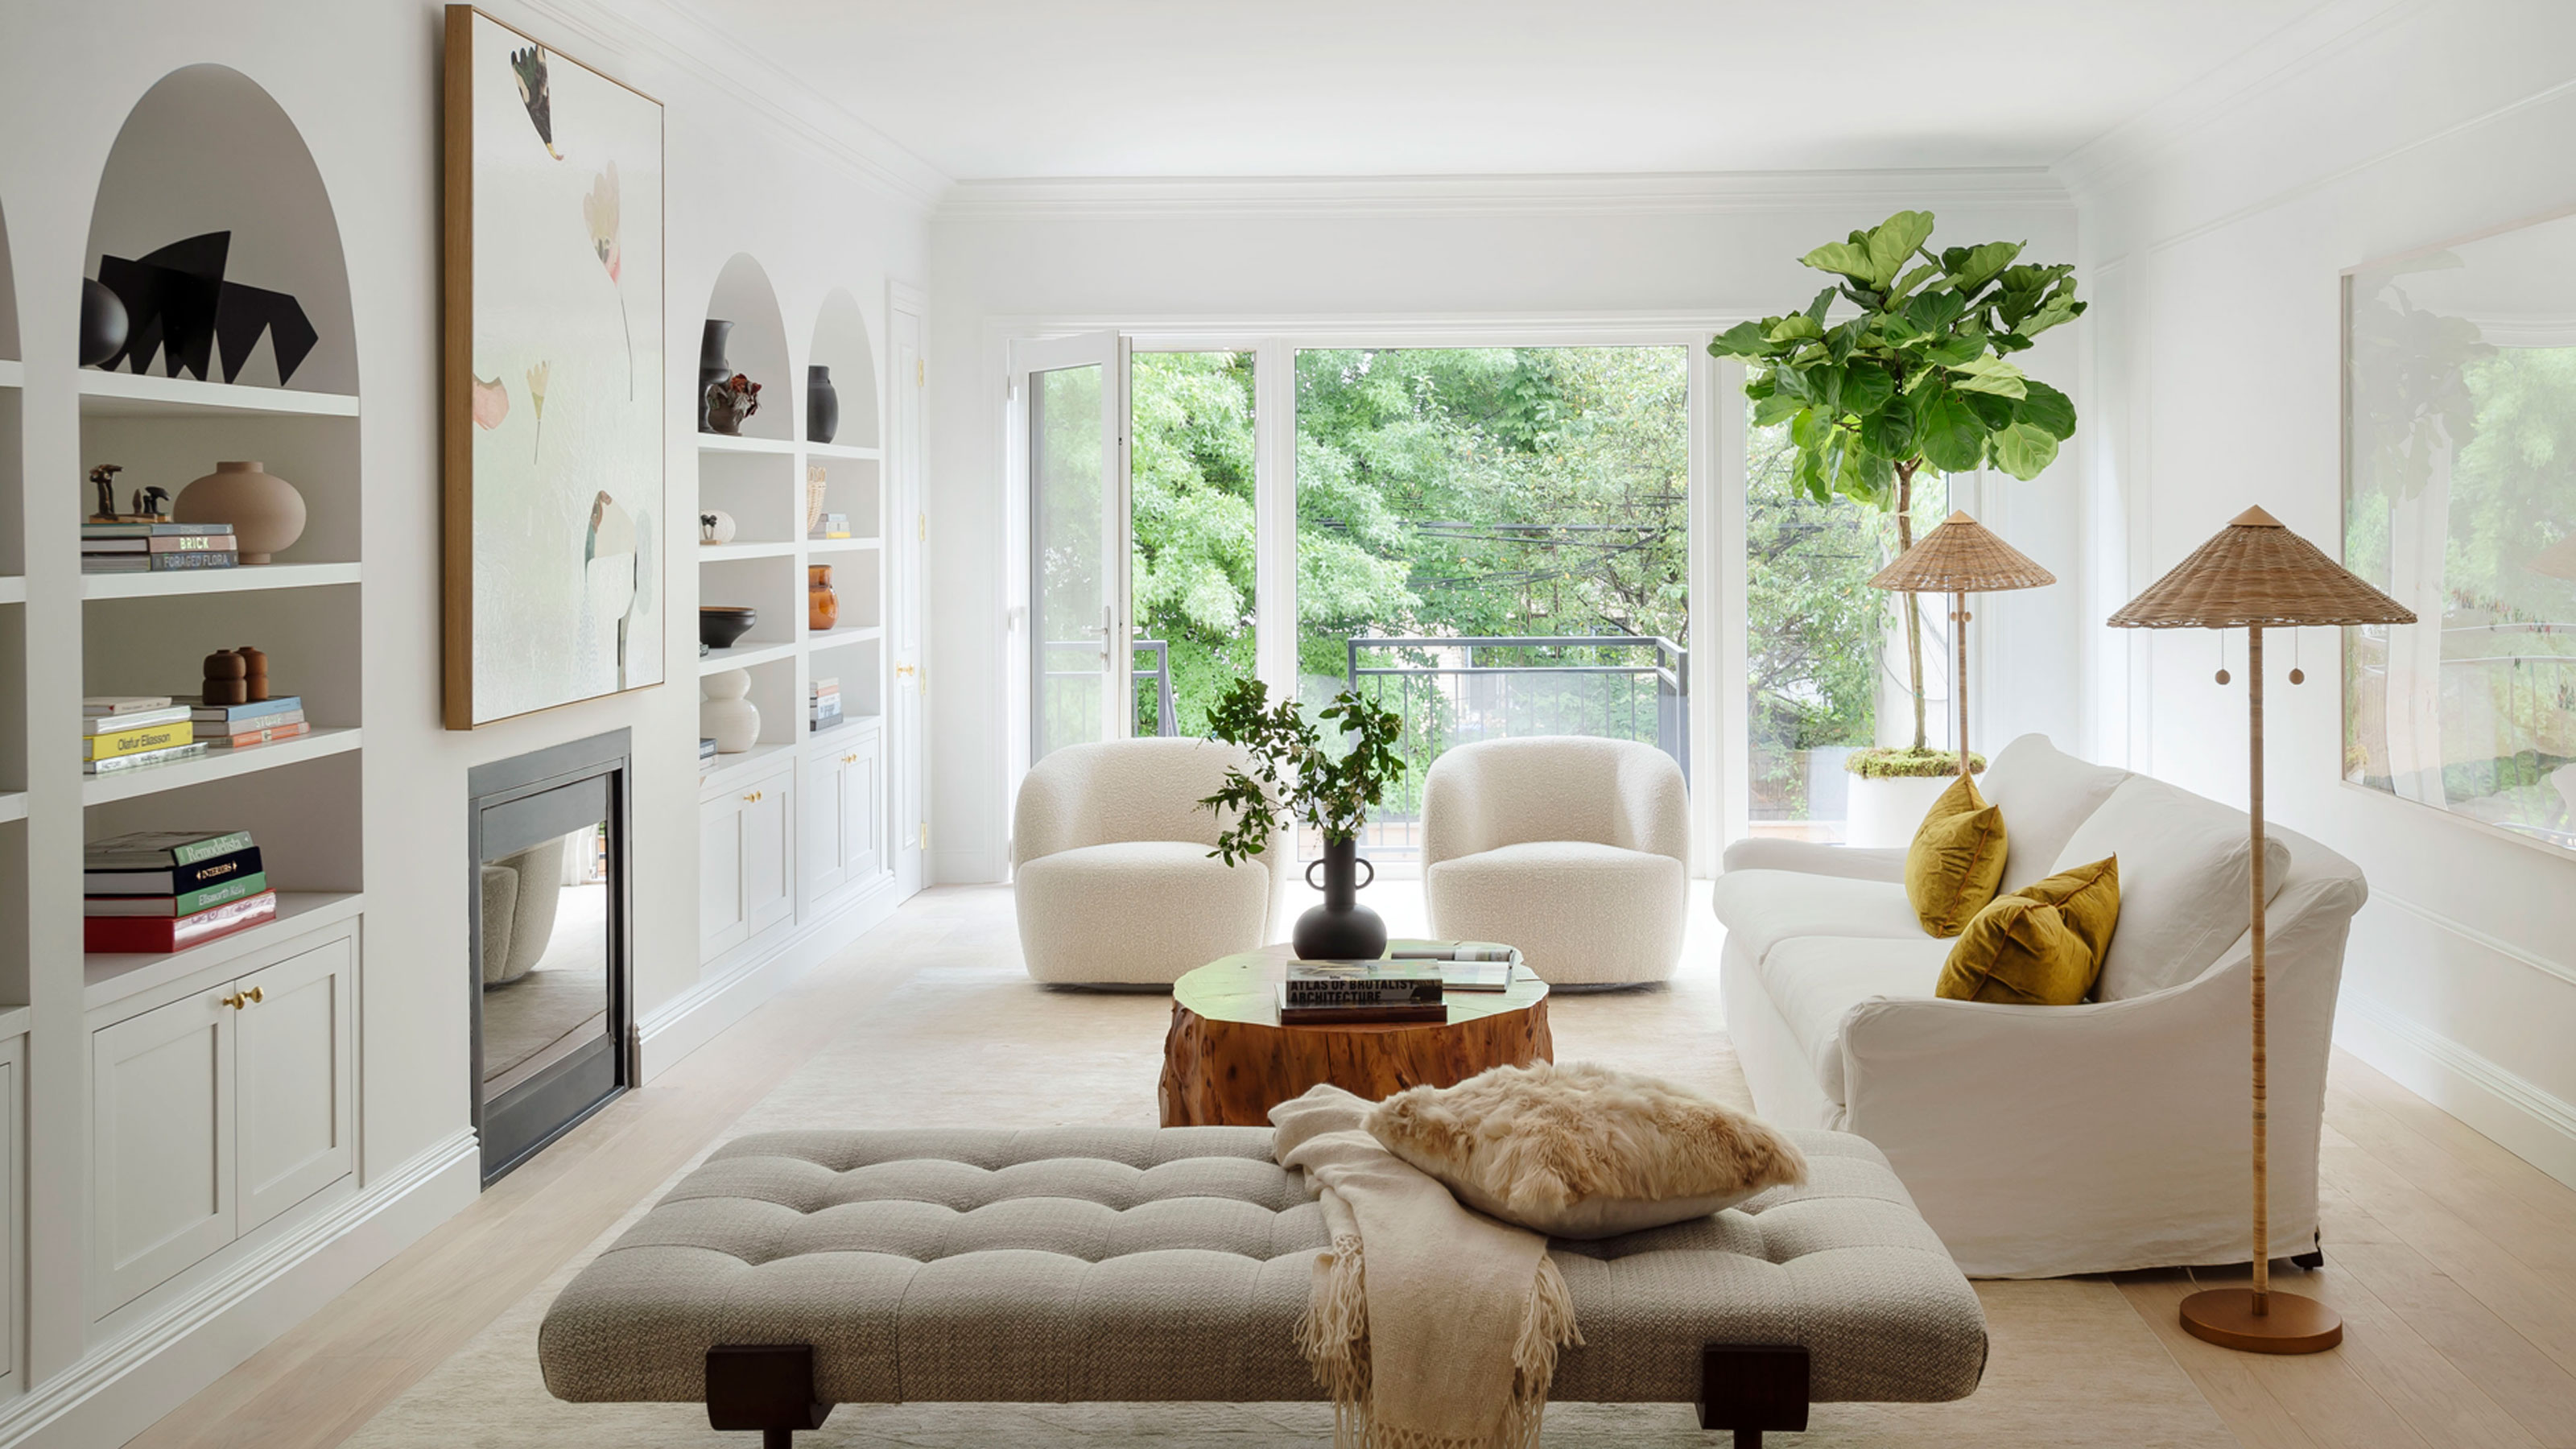 Living Room Storage Ideas – Experts On How To Store In Style | Livingetc